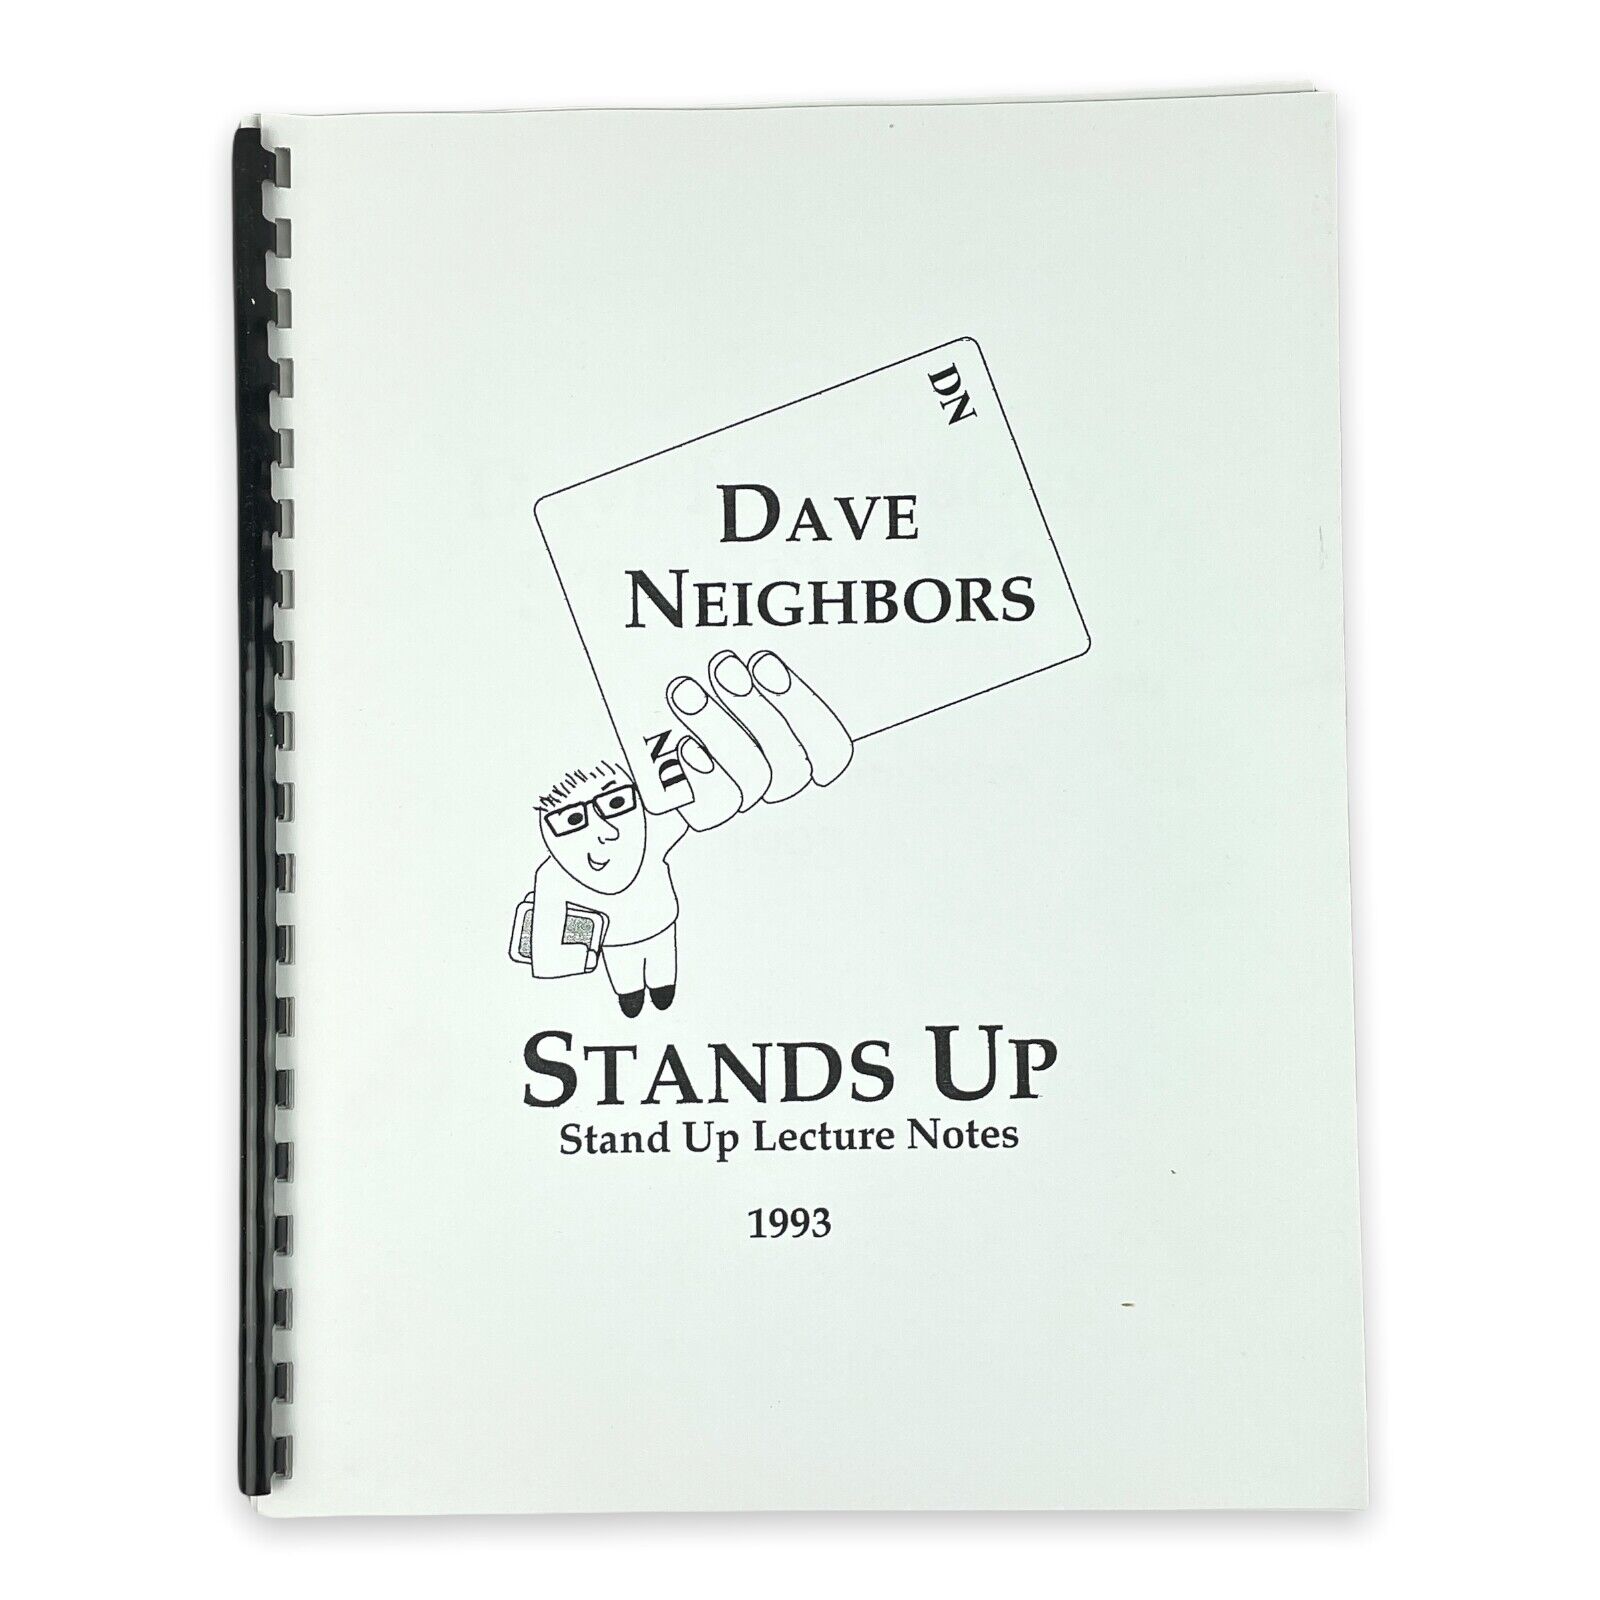 1993 Dave Neighbors Stands Up Lecture Notes Unpublished Magic Trick Routines